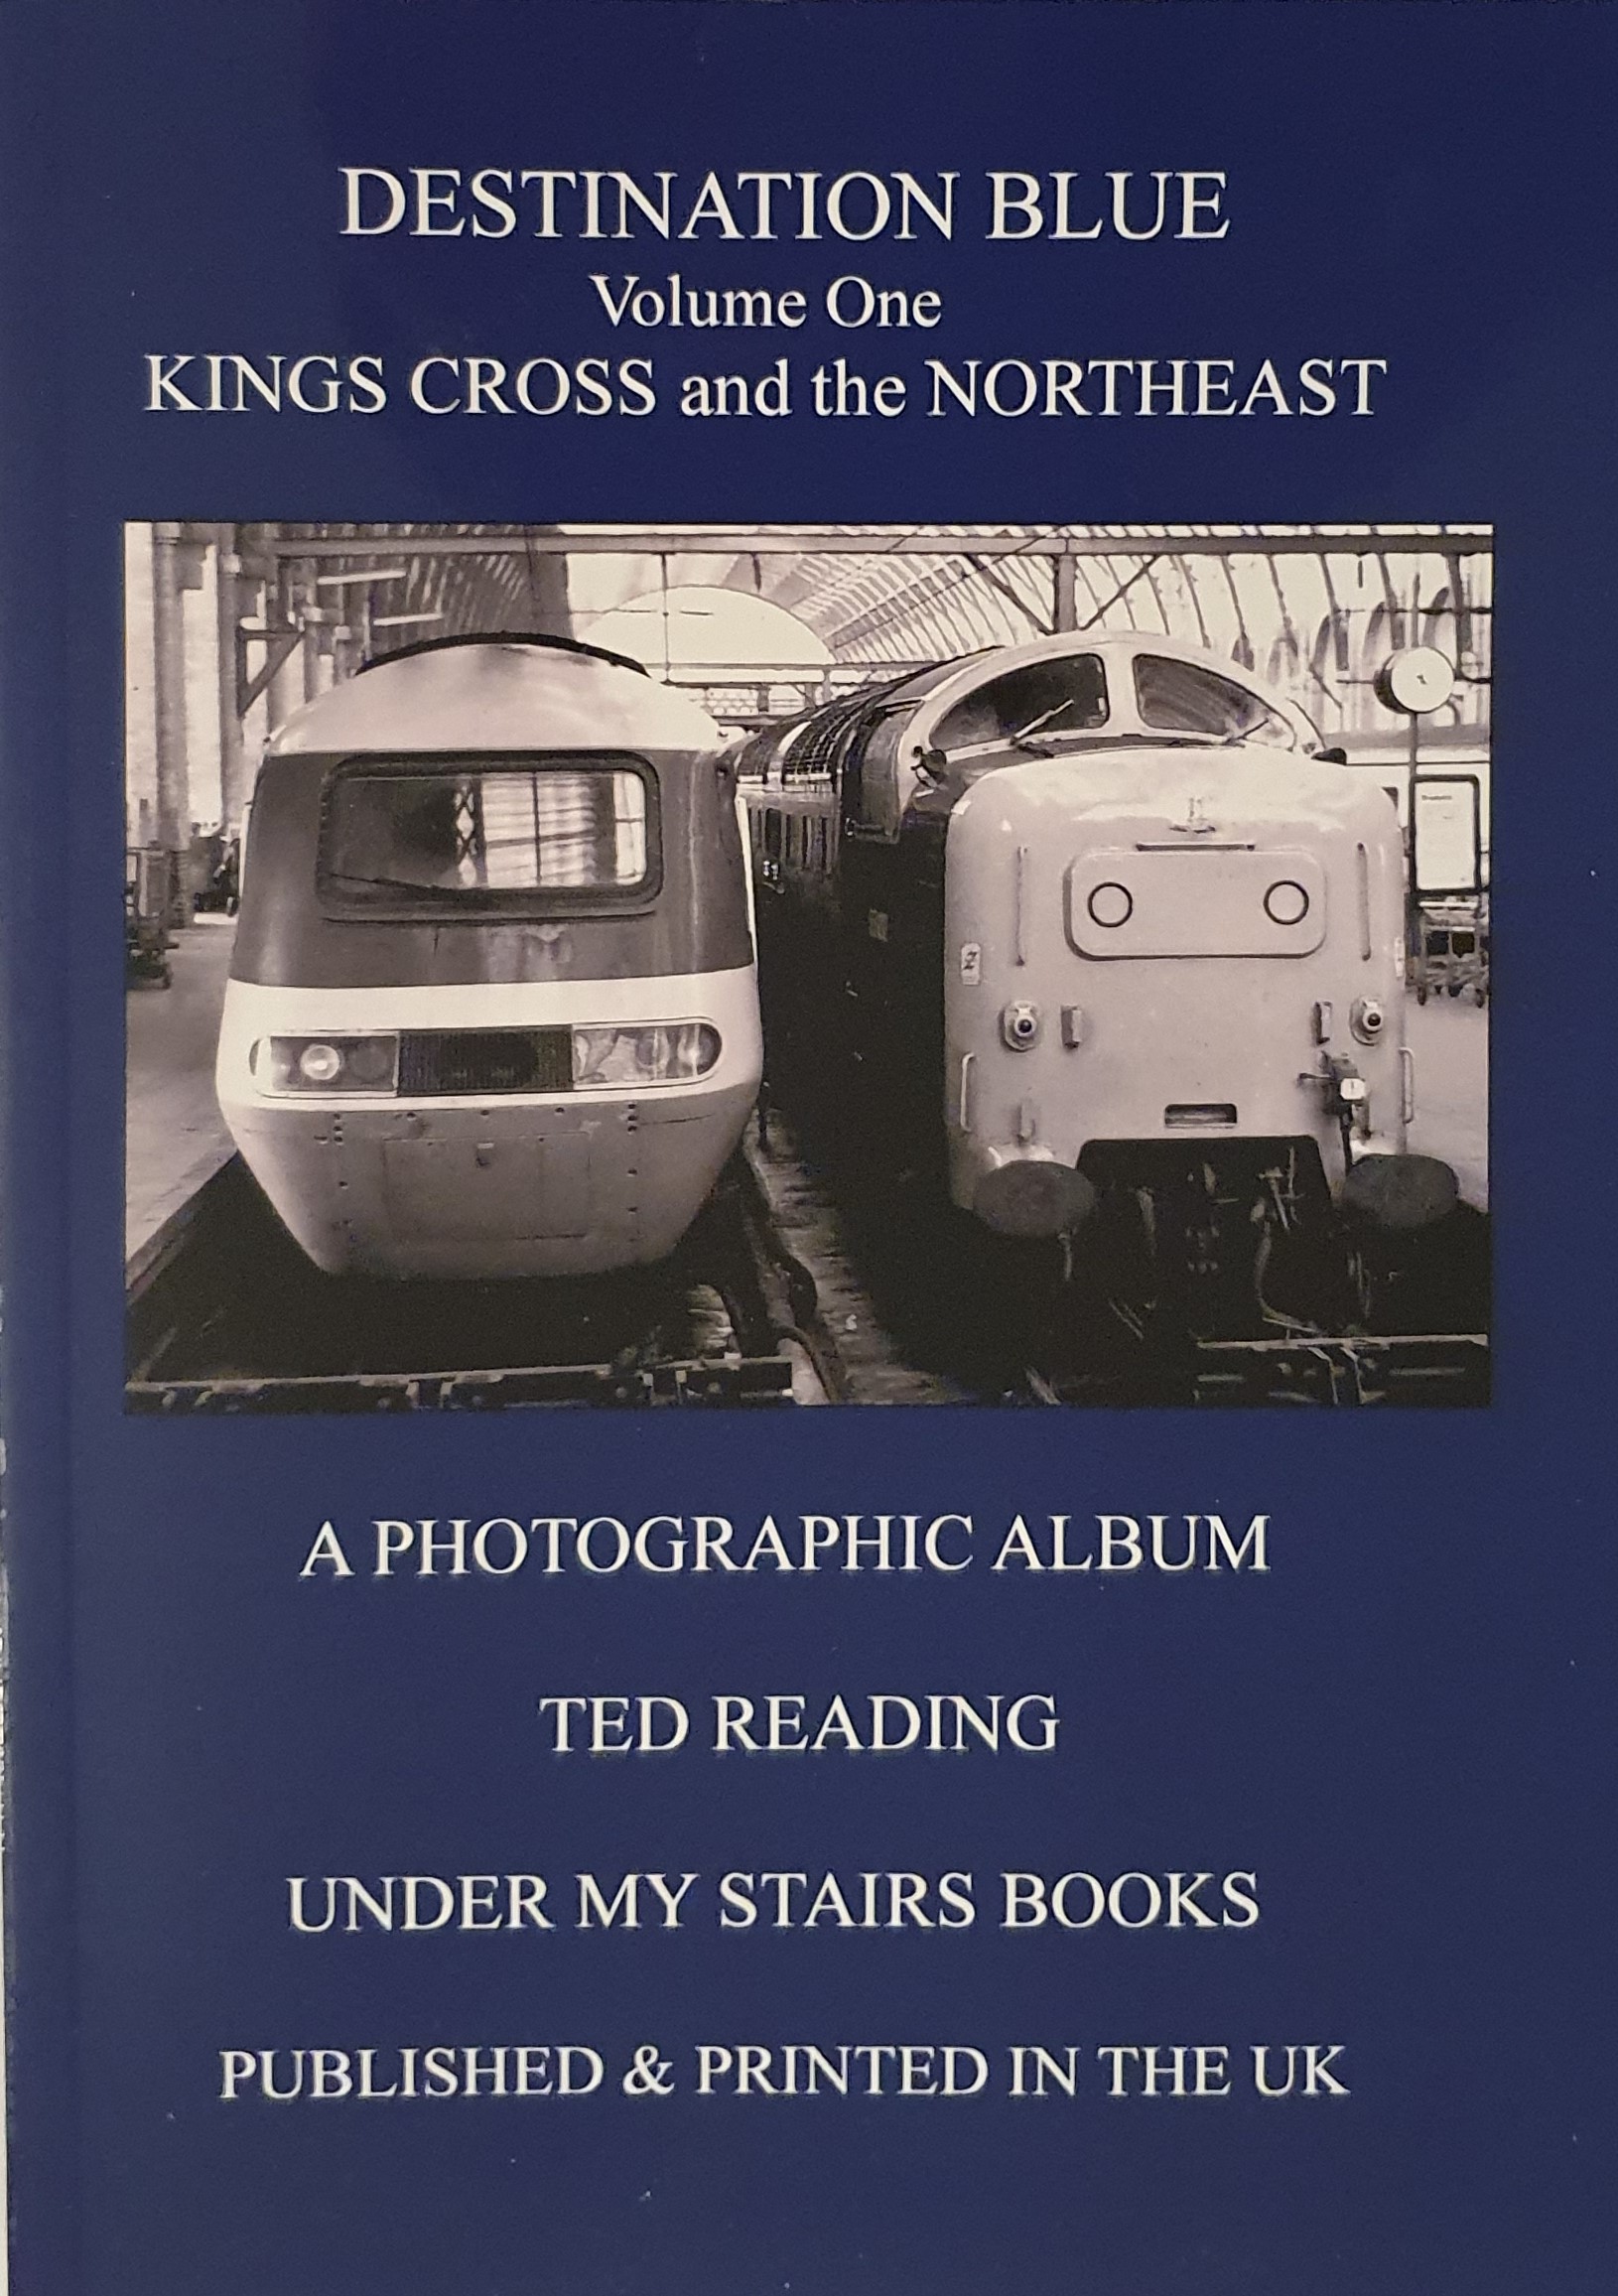 Destination Blue Volume One - Kings Cross and the Northeast